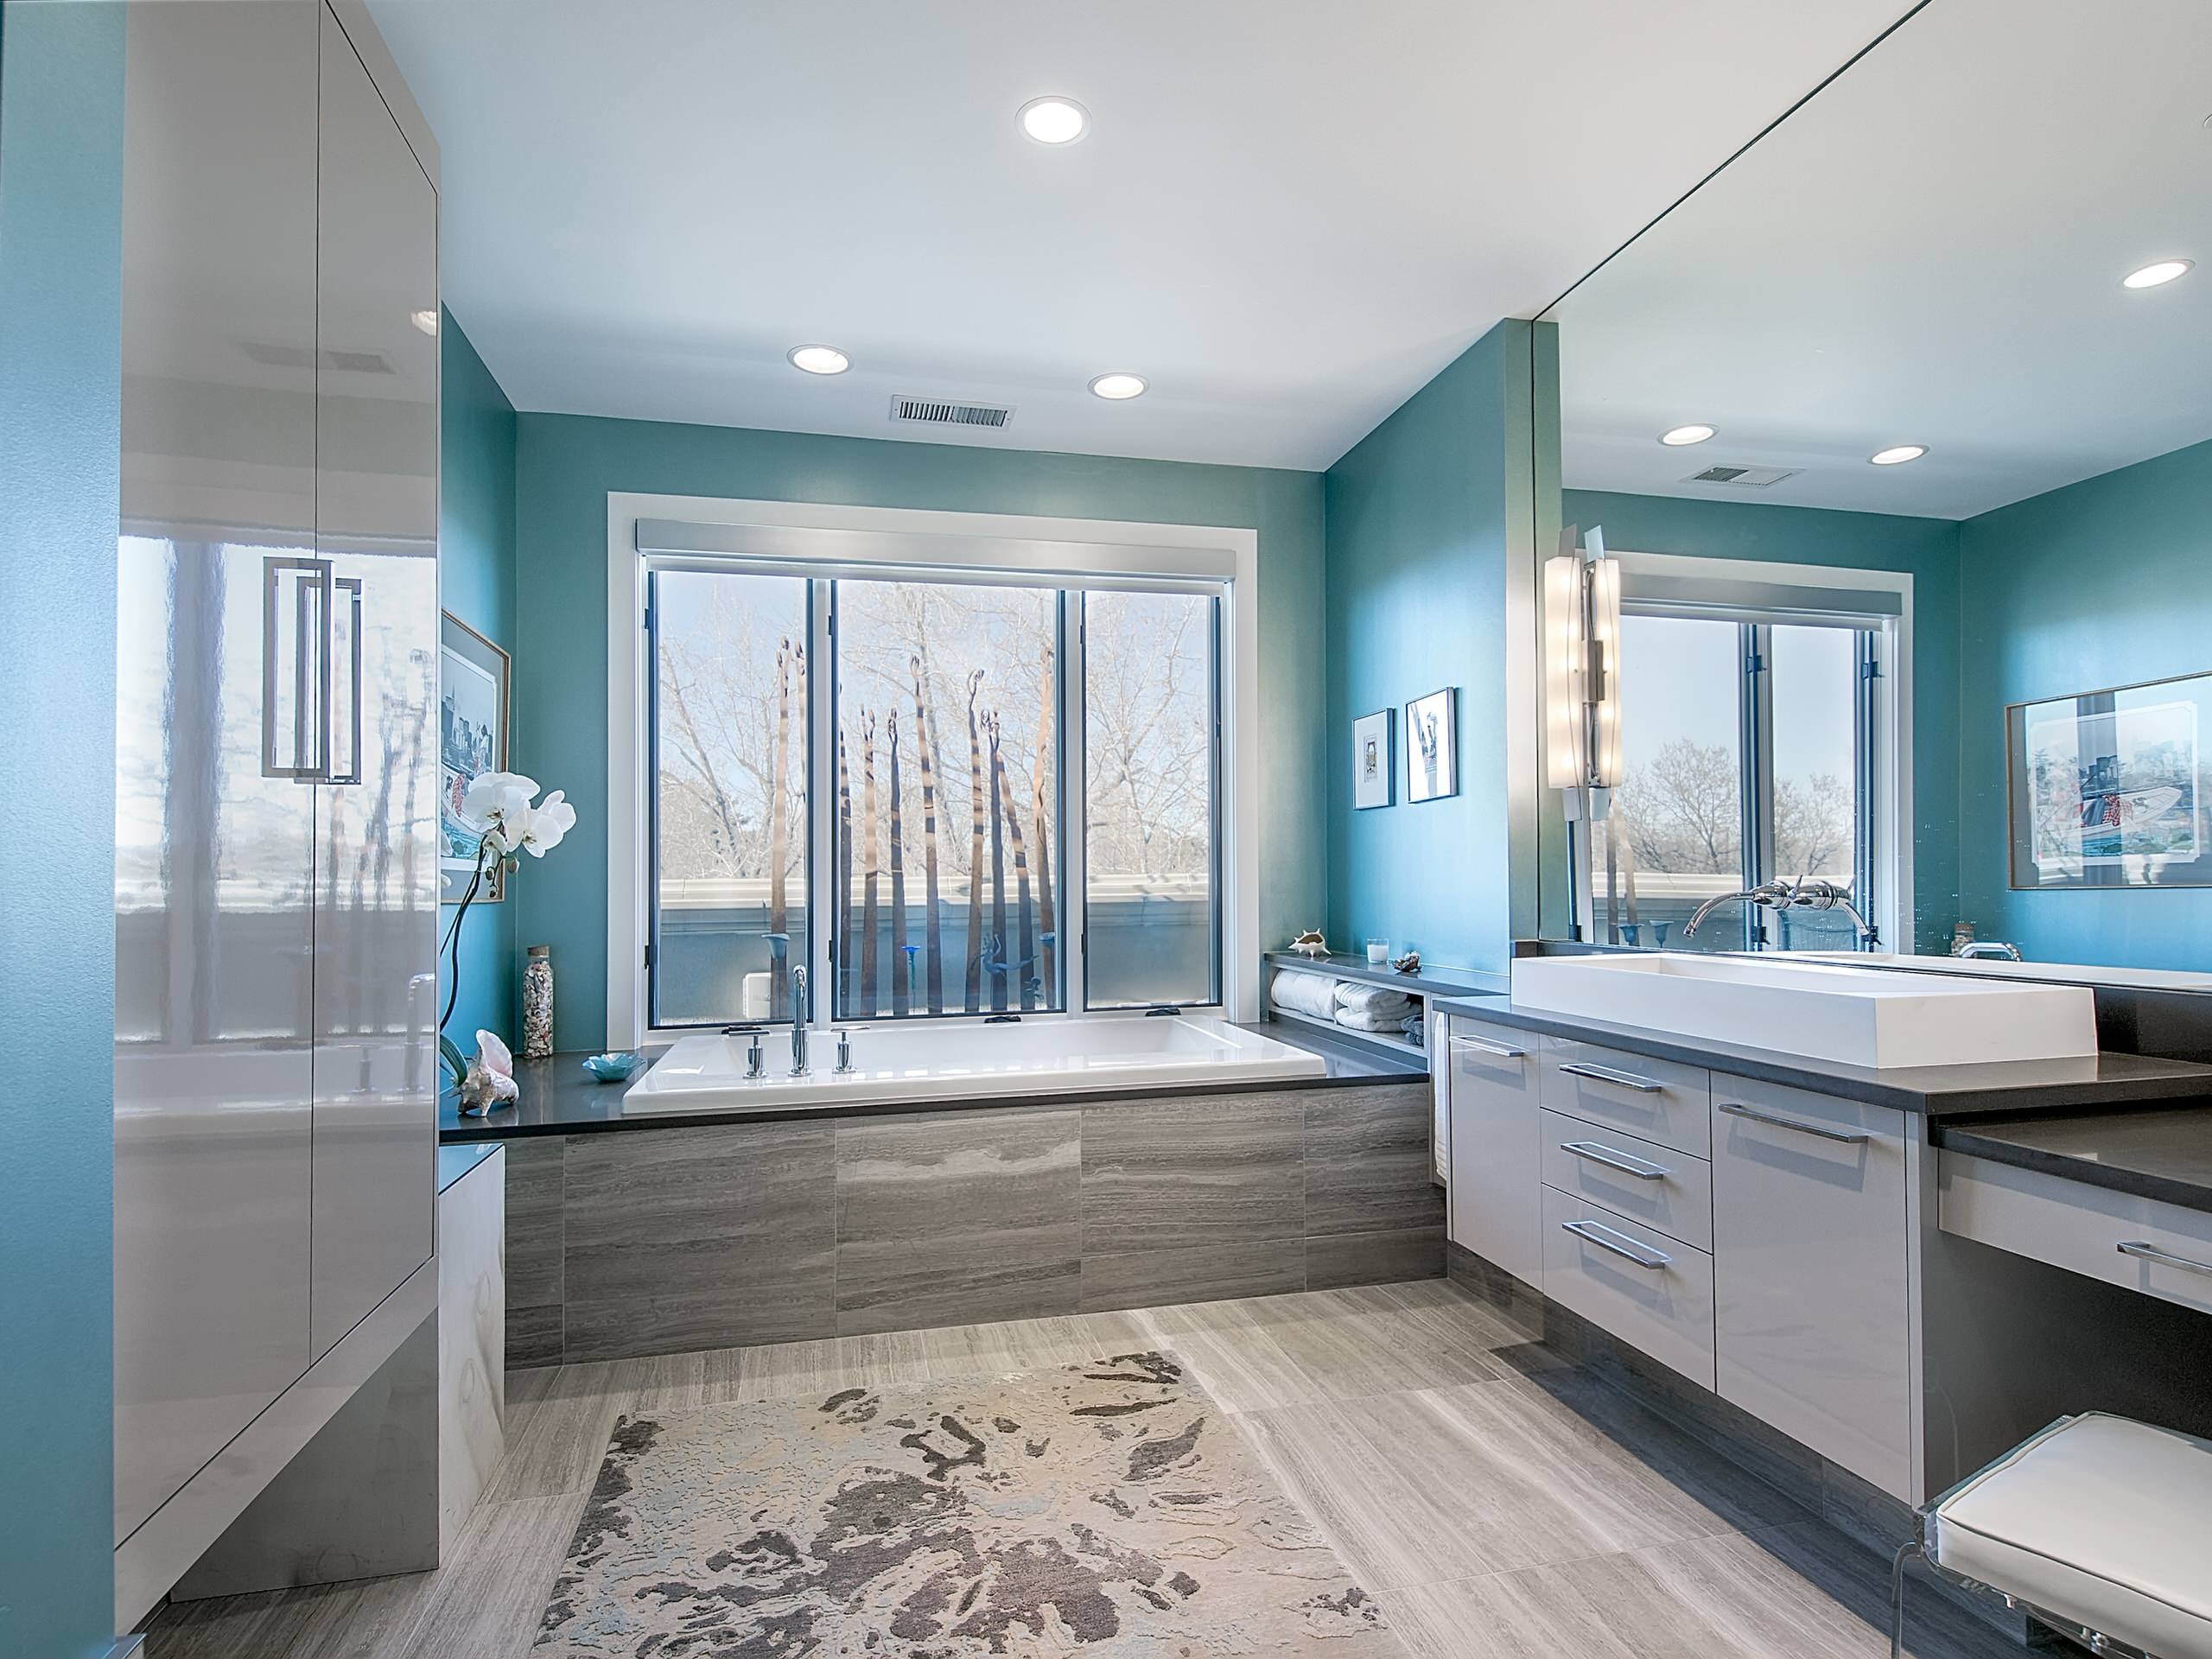 Turquoise And Gray Bathroom Ideas, Teal And Gray Bathroom